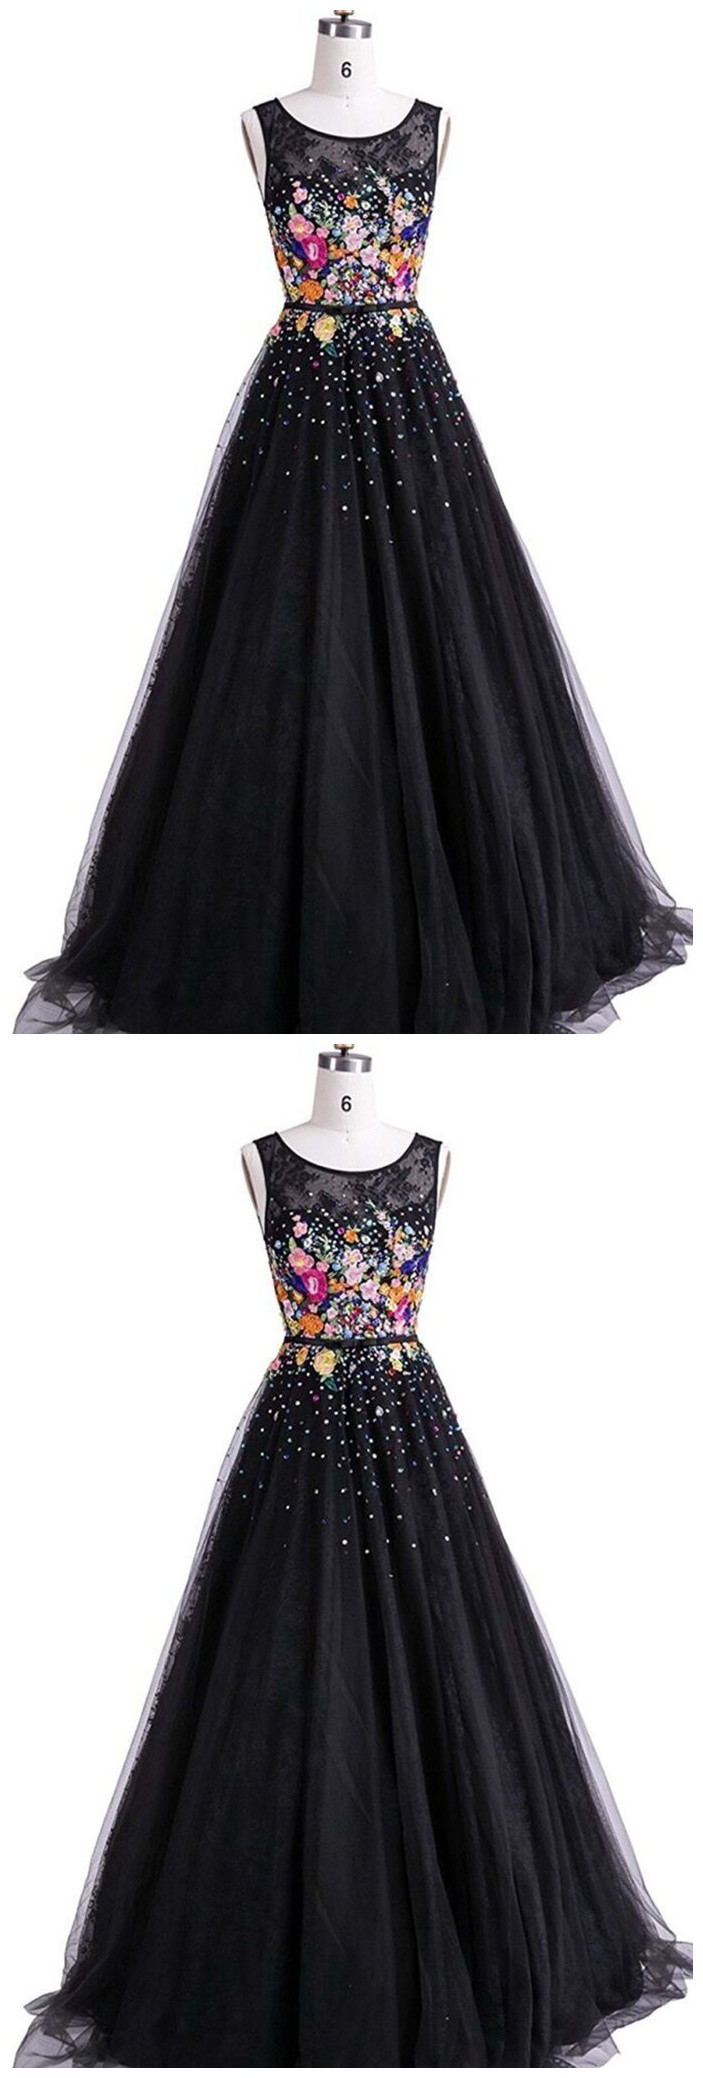 Cute Tulle Round Neck Flowers Long Dresses,prom Dress For Teens